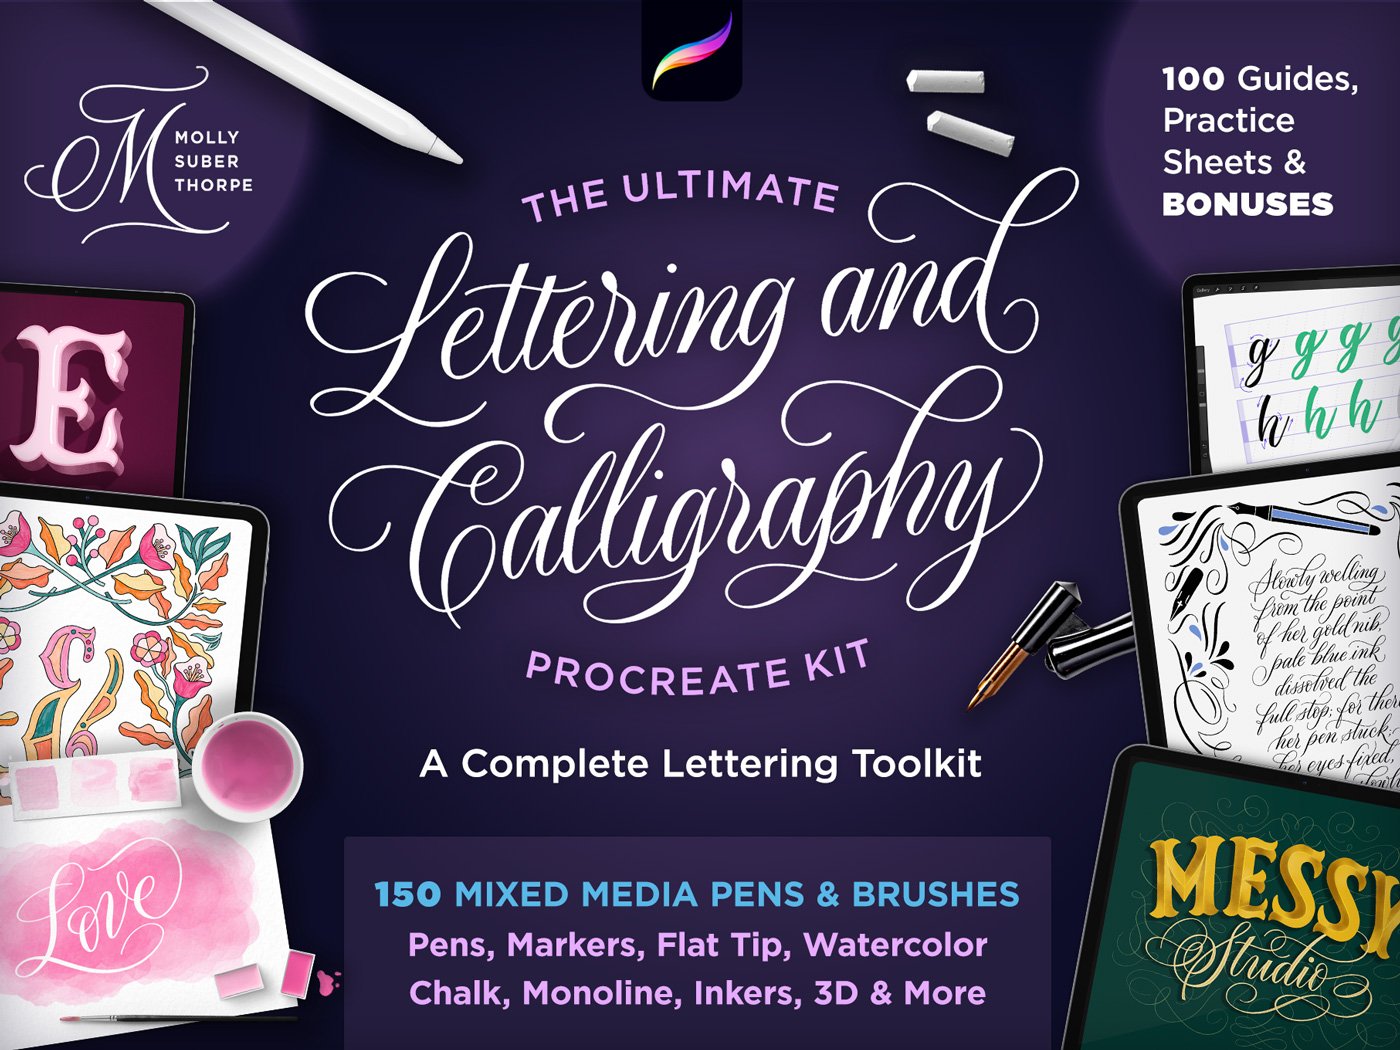 Ultimate-Lettering-and-Calligraphy-Kit-Cover-4-3-Ratio.jpg